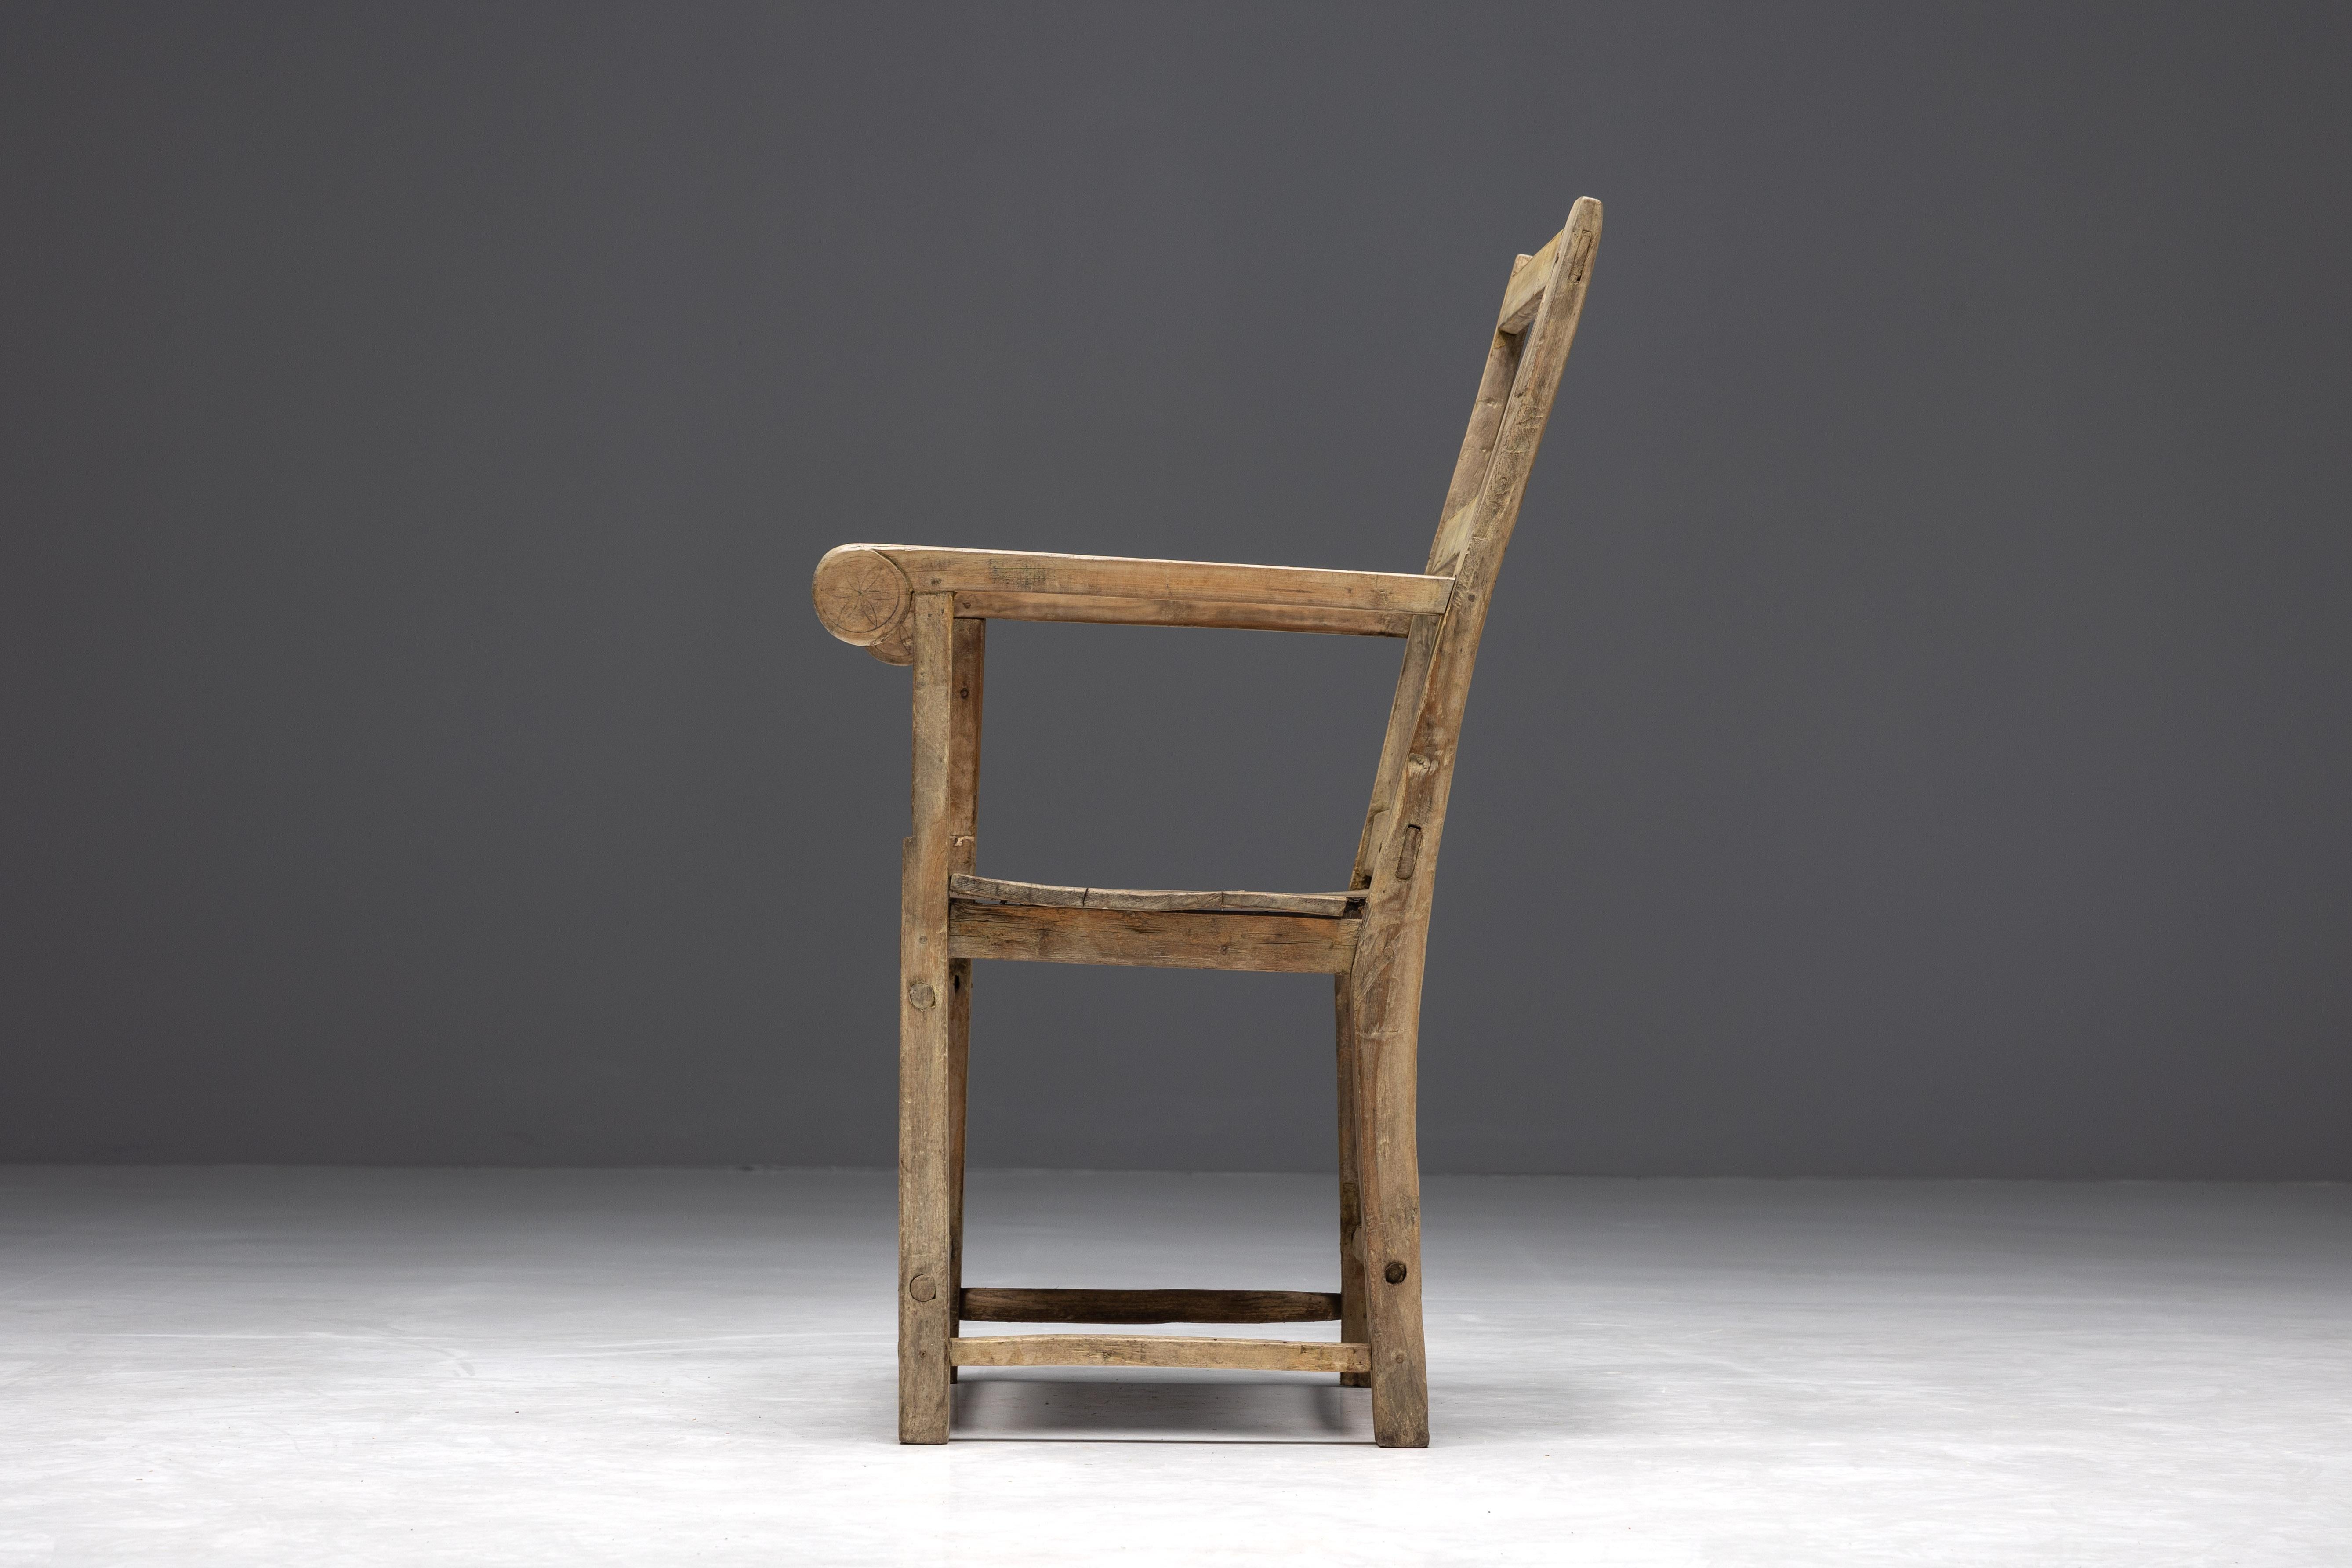 Wood Rustic Art Populaire Armchair, France, 19th Century For Sale